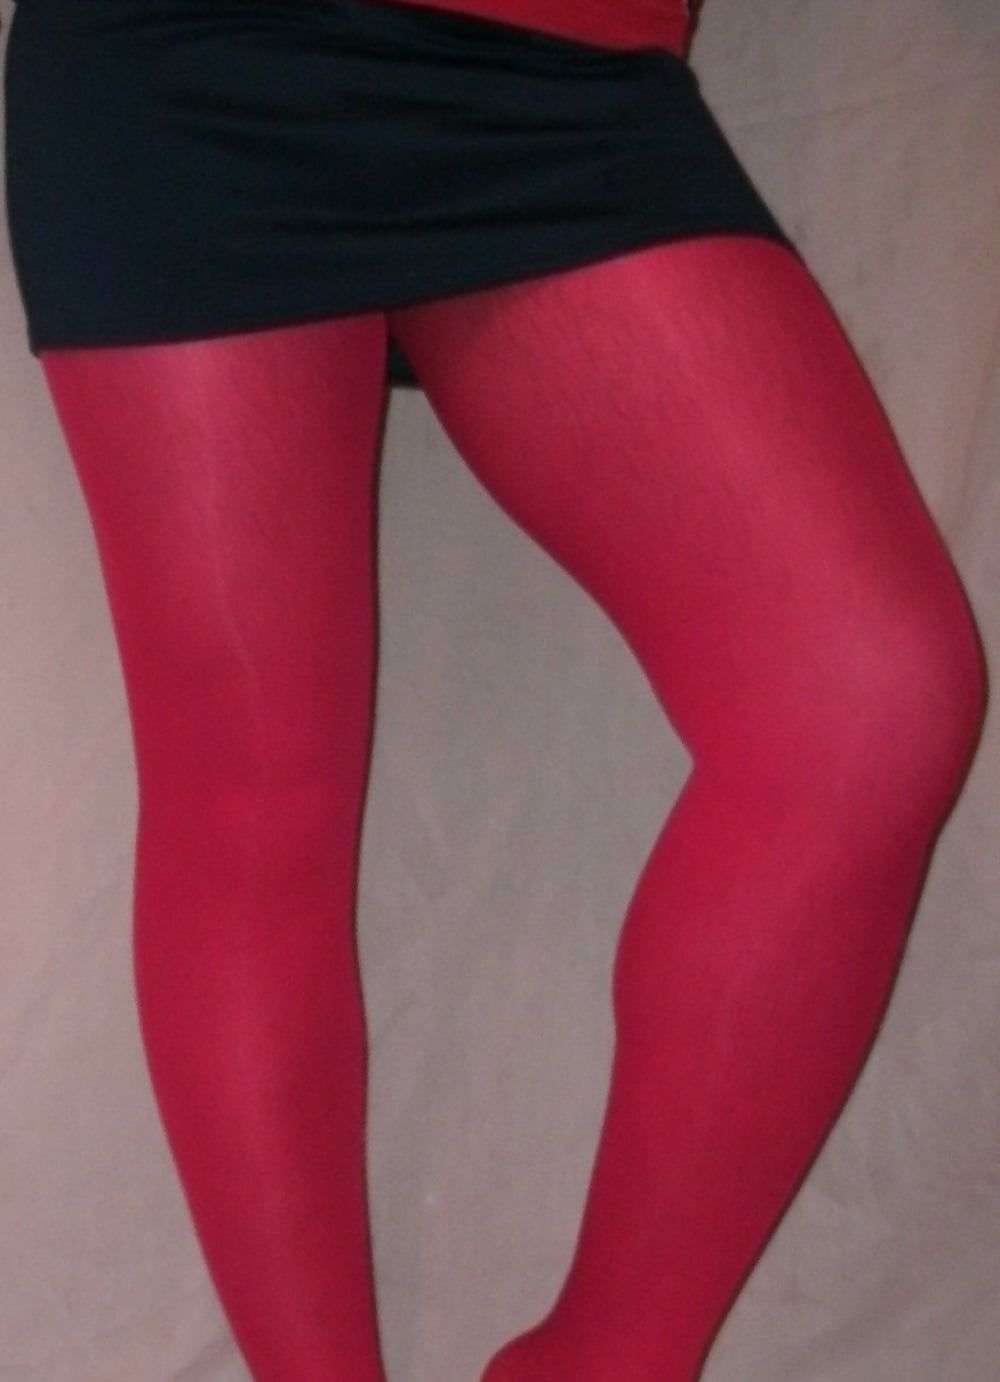 Red stockings #2